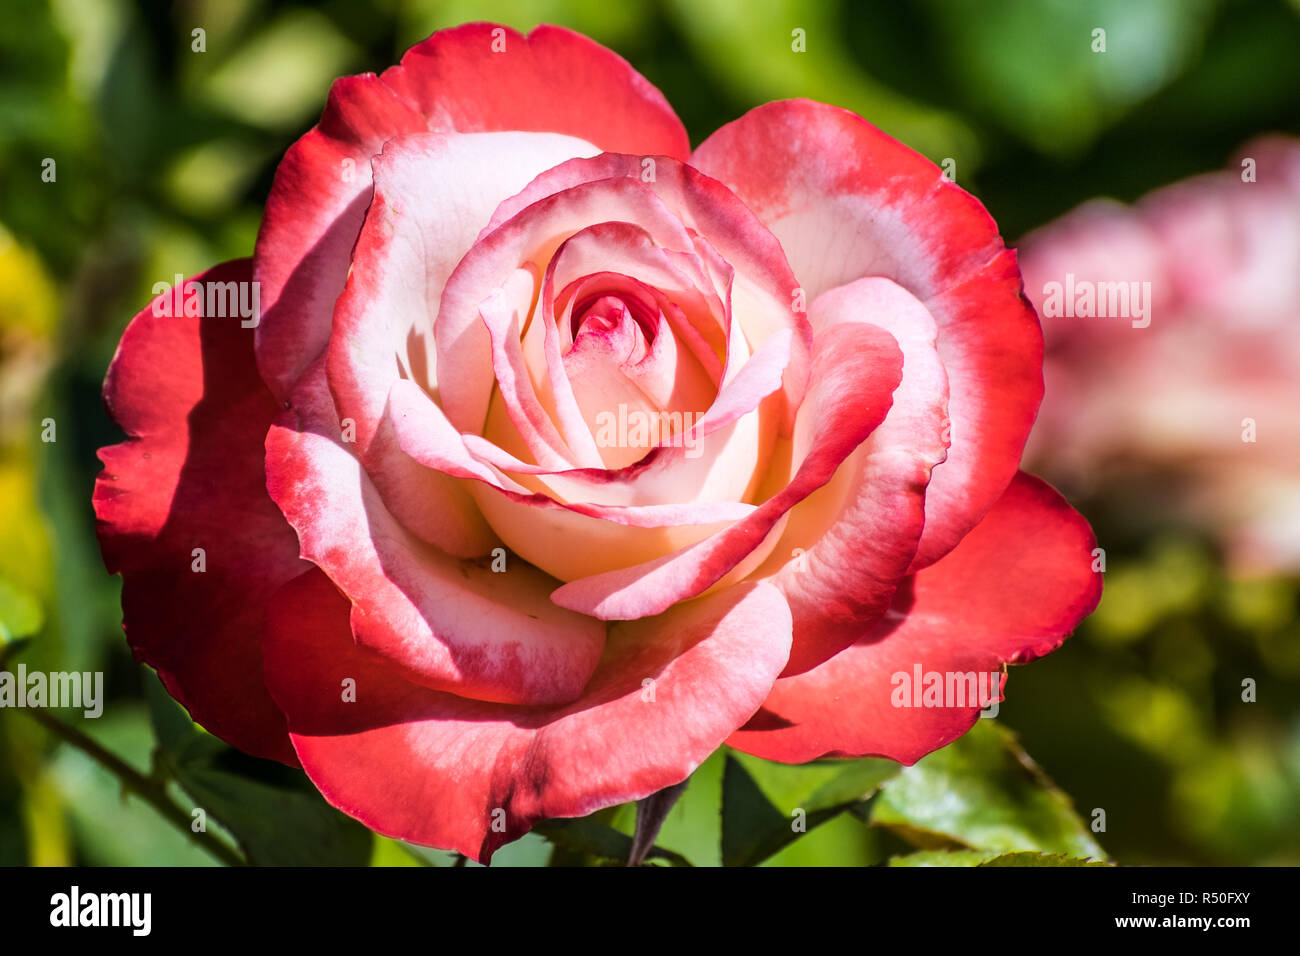 Close up of rose with red and white velvet looking petals, blooming In the San Jose Municipal Rose Garden on a sunny day, California Stock Photo